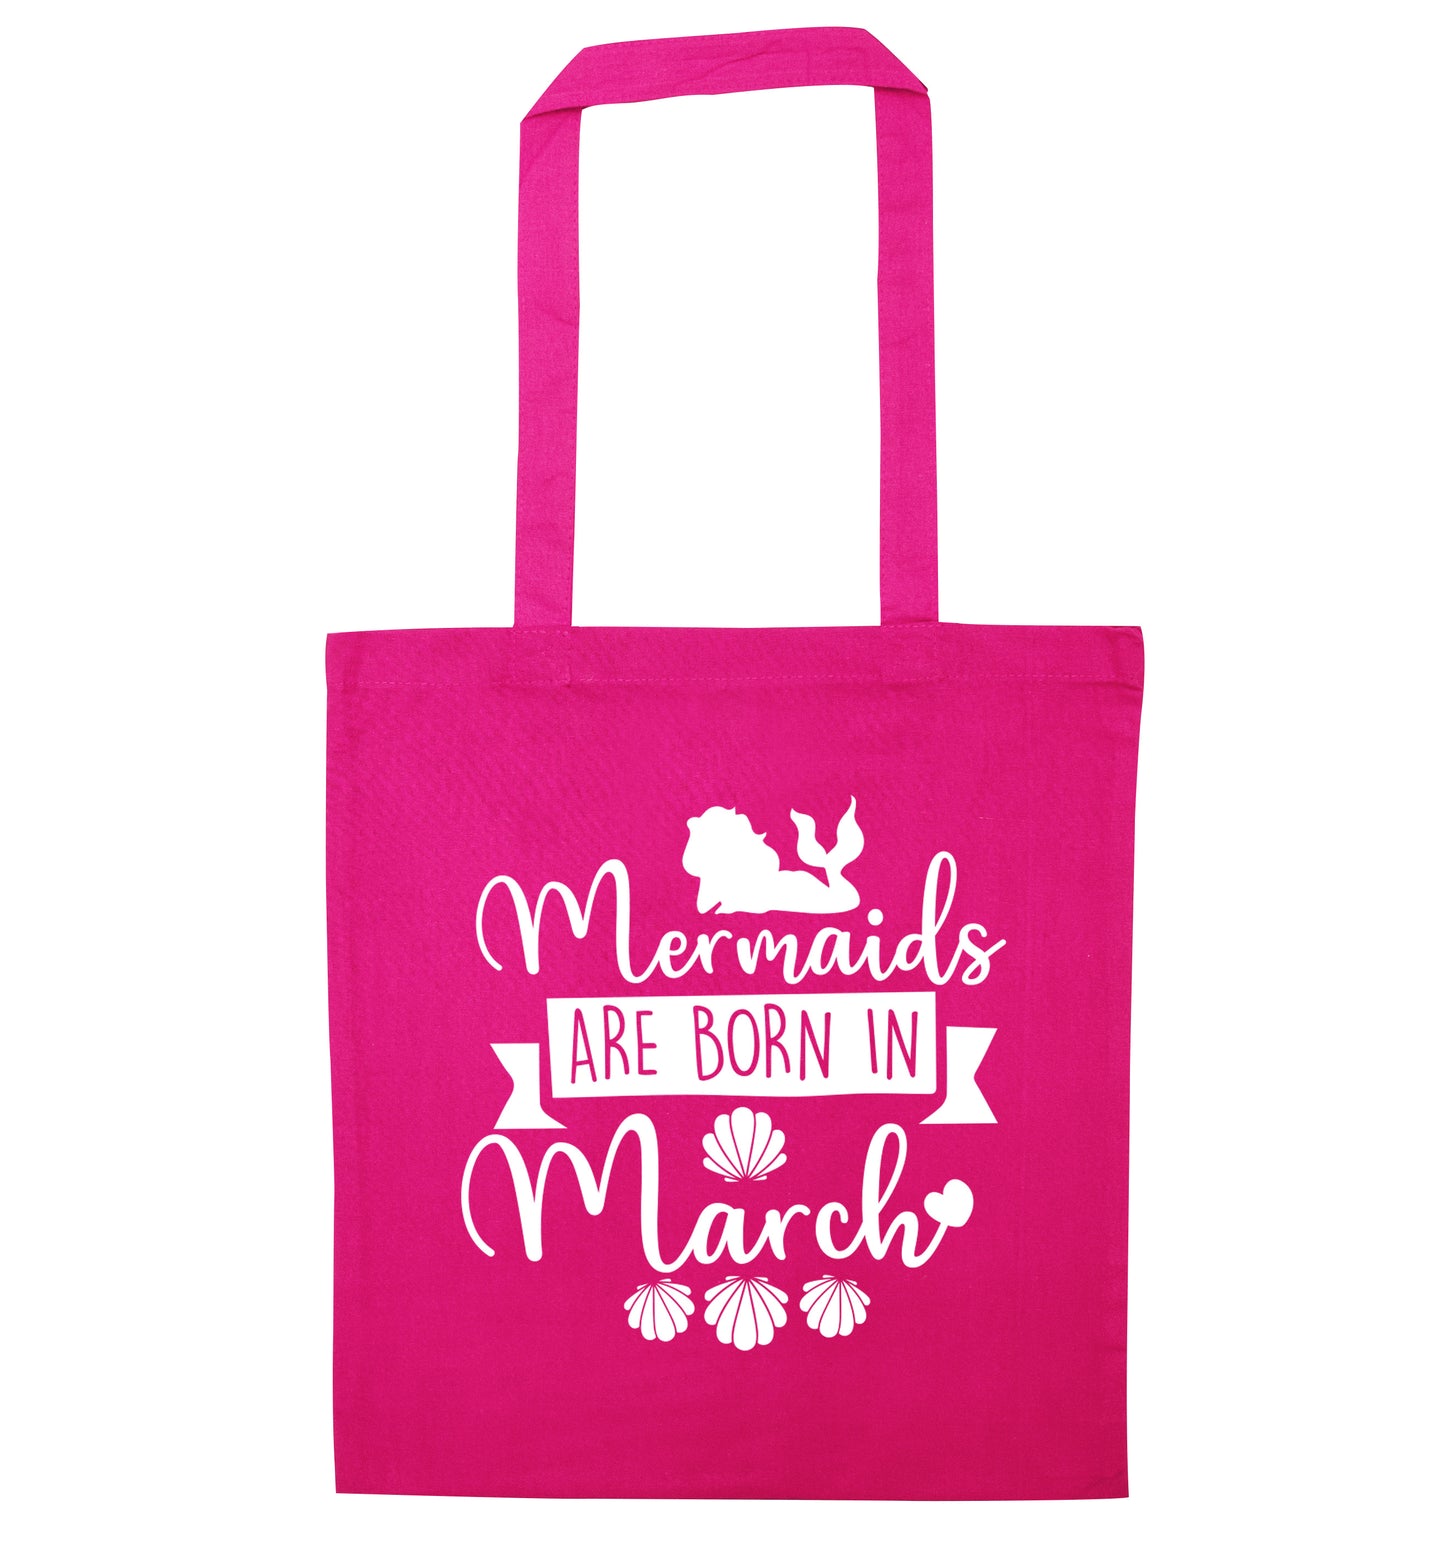 Mermaids are born in March pink tote bag